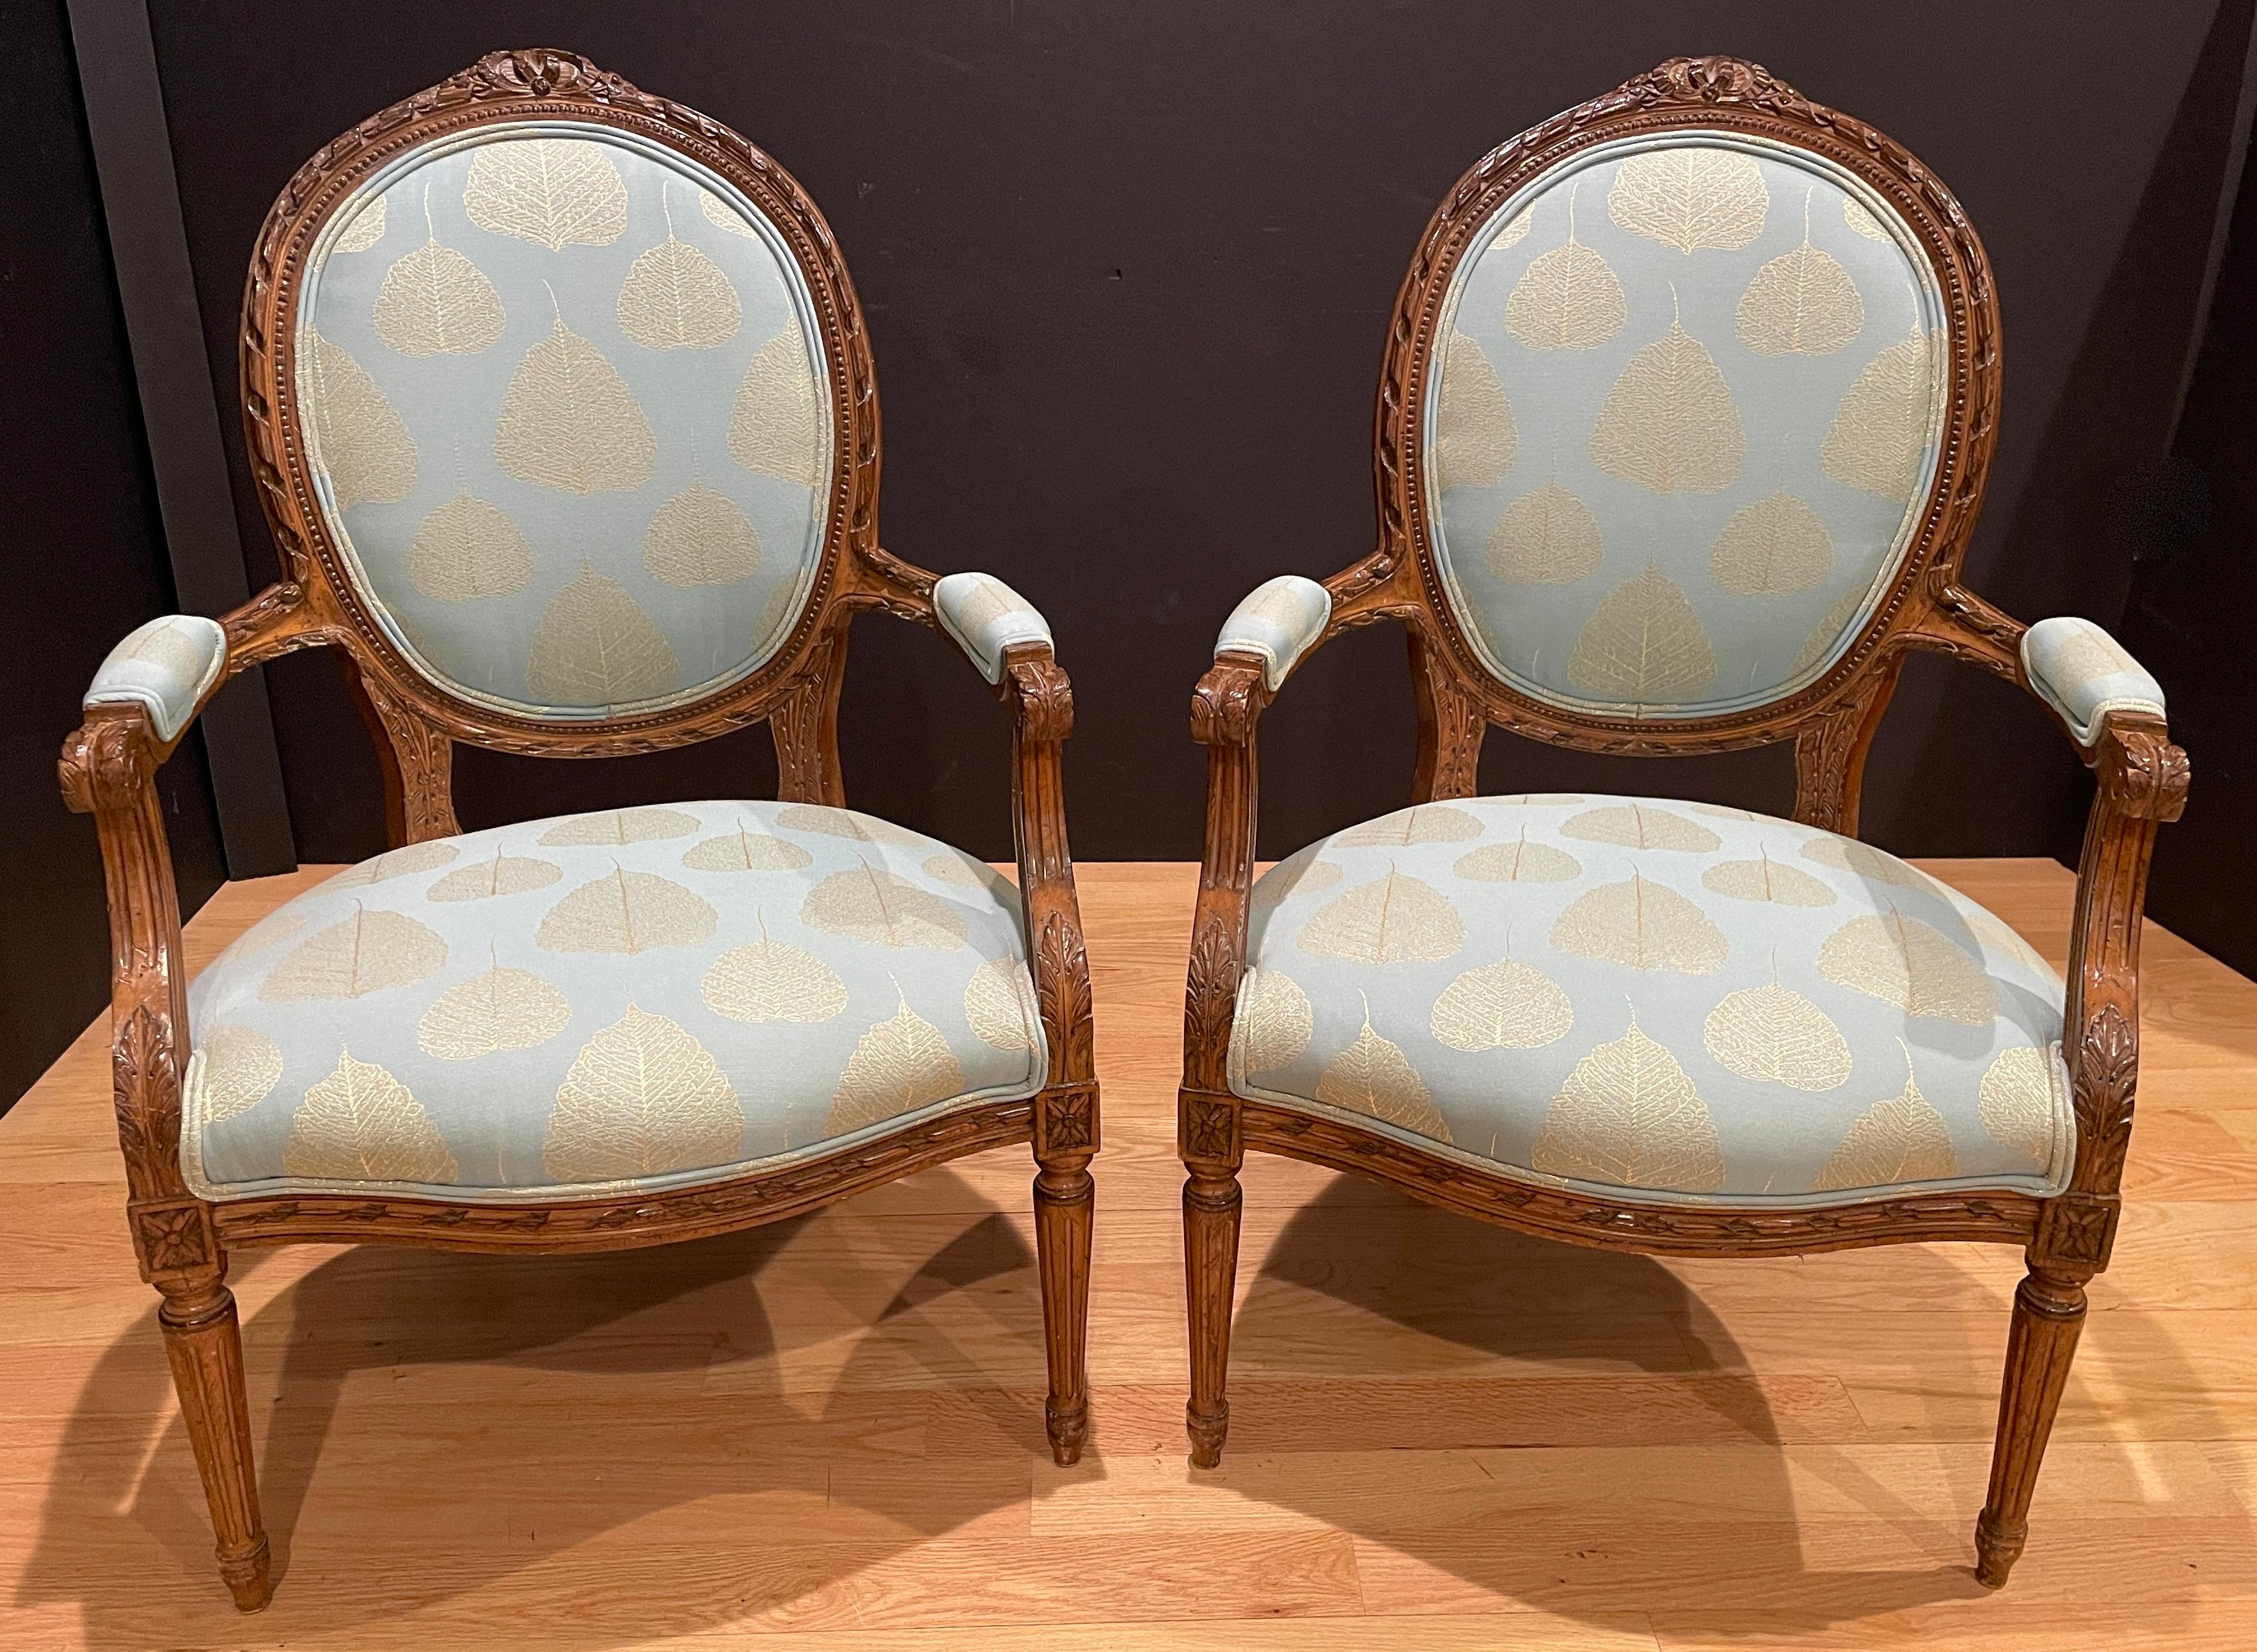 Pair of Louis XVI style carved walnut fauteuils. Bow and ribbon details. Blue and raised gilt fabric.